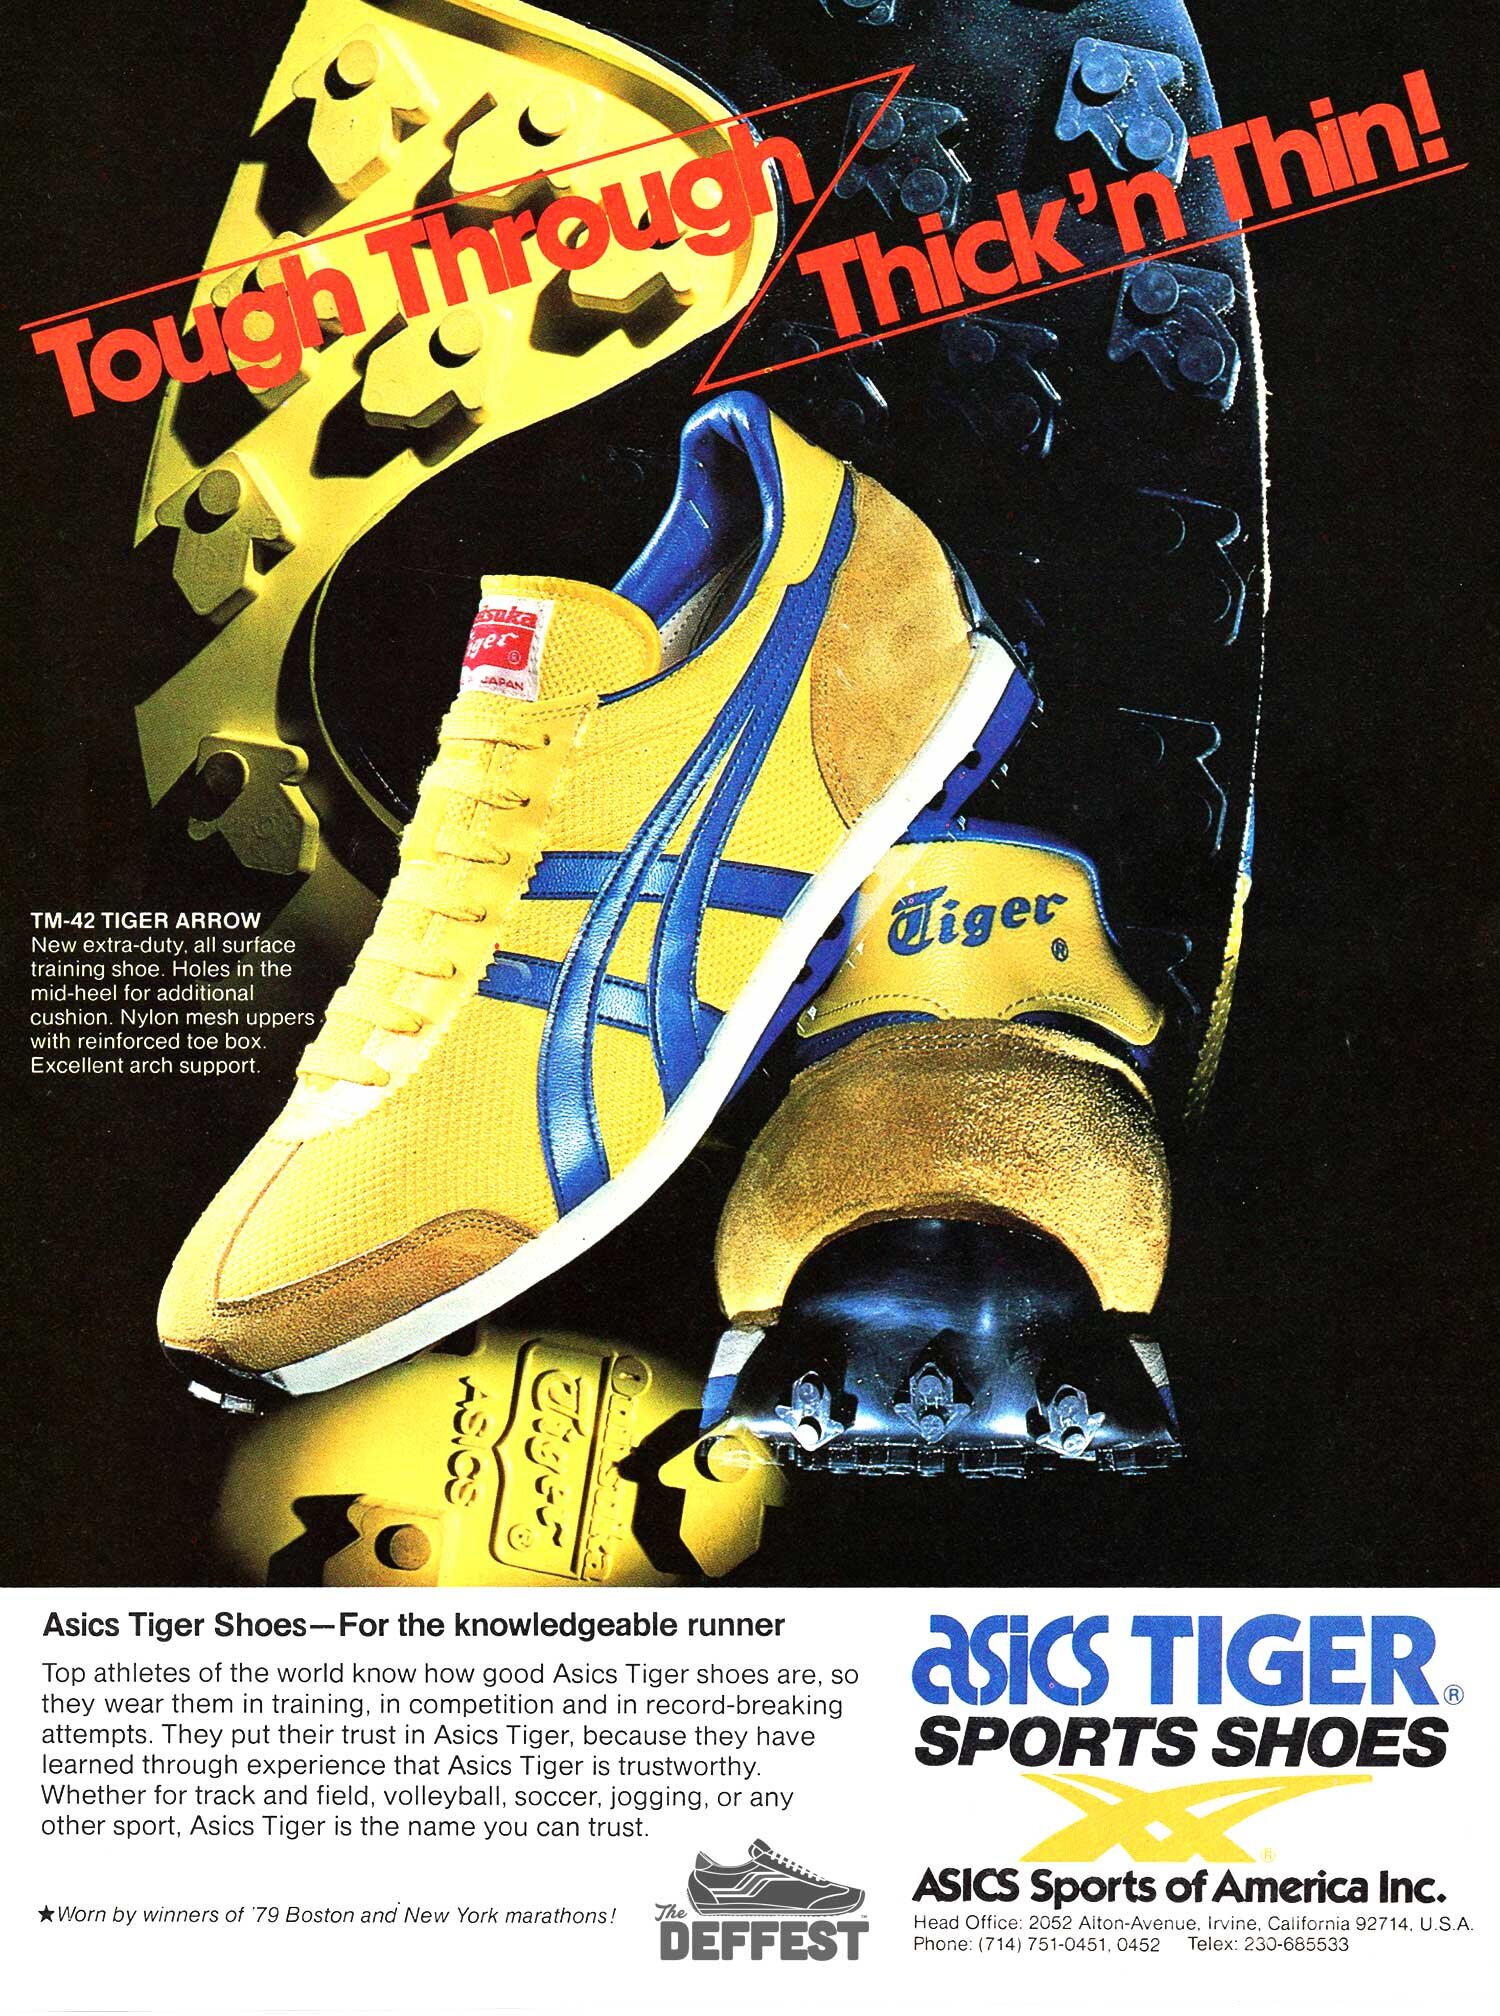 narrow shade delicacy vintage asics tiger sneakers 1980s fashion — The Deffest®. A vintage and  retro sneaker blog. — Vintage Ads